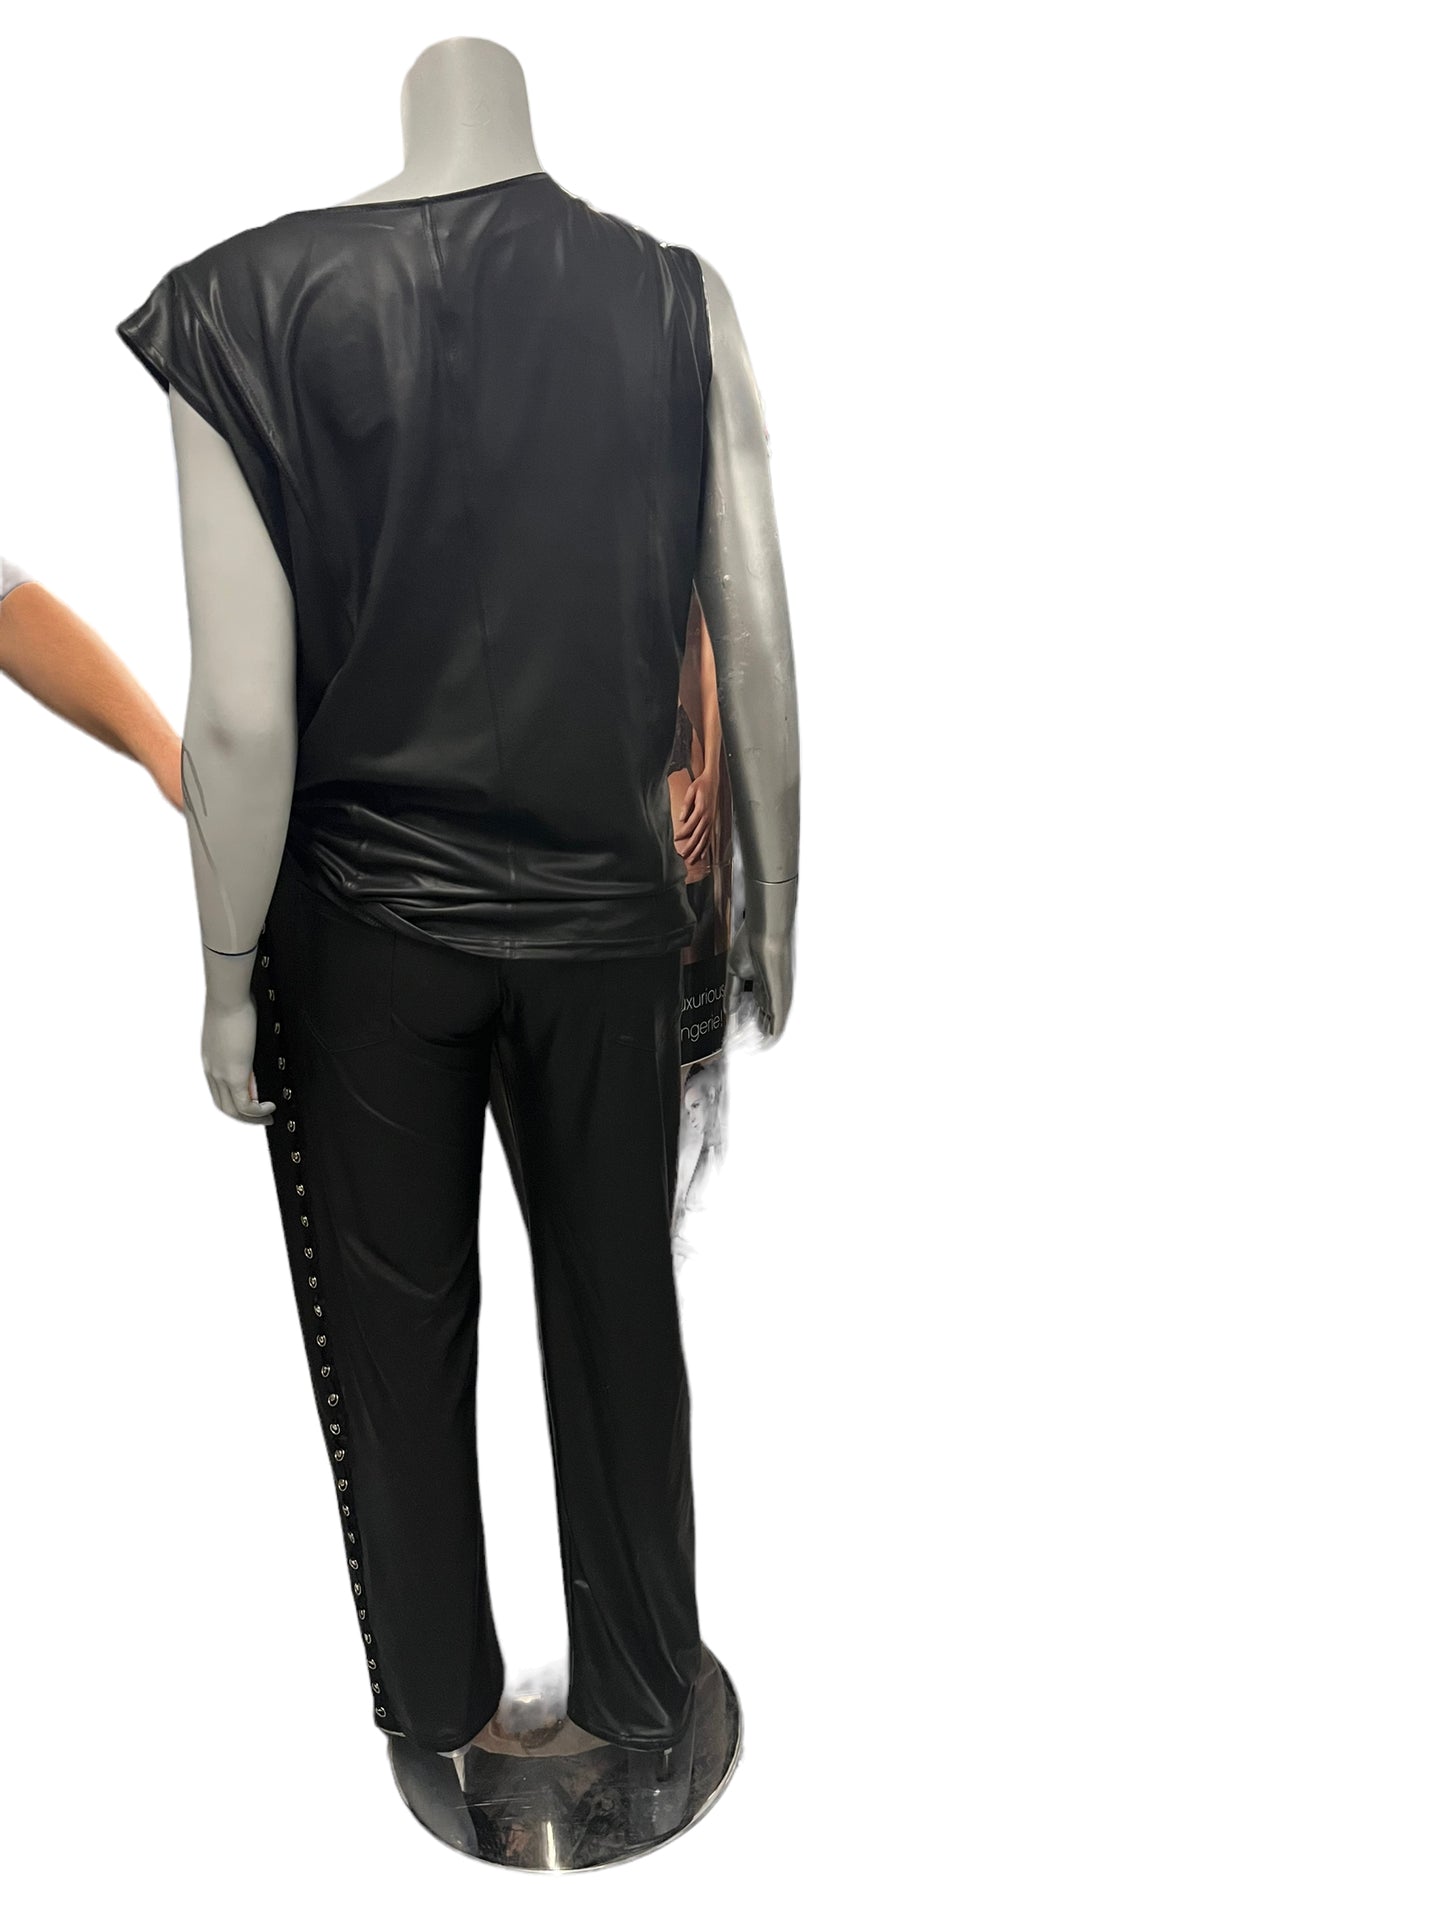 Noir - LL14 - Daring Black Top with Matching Pants - With Zipper and Buttons - Size 3XL.